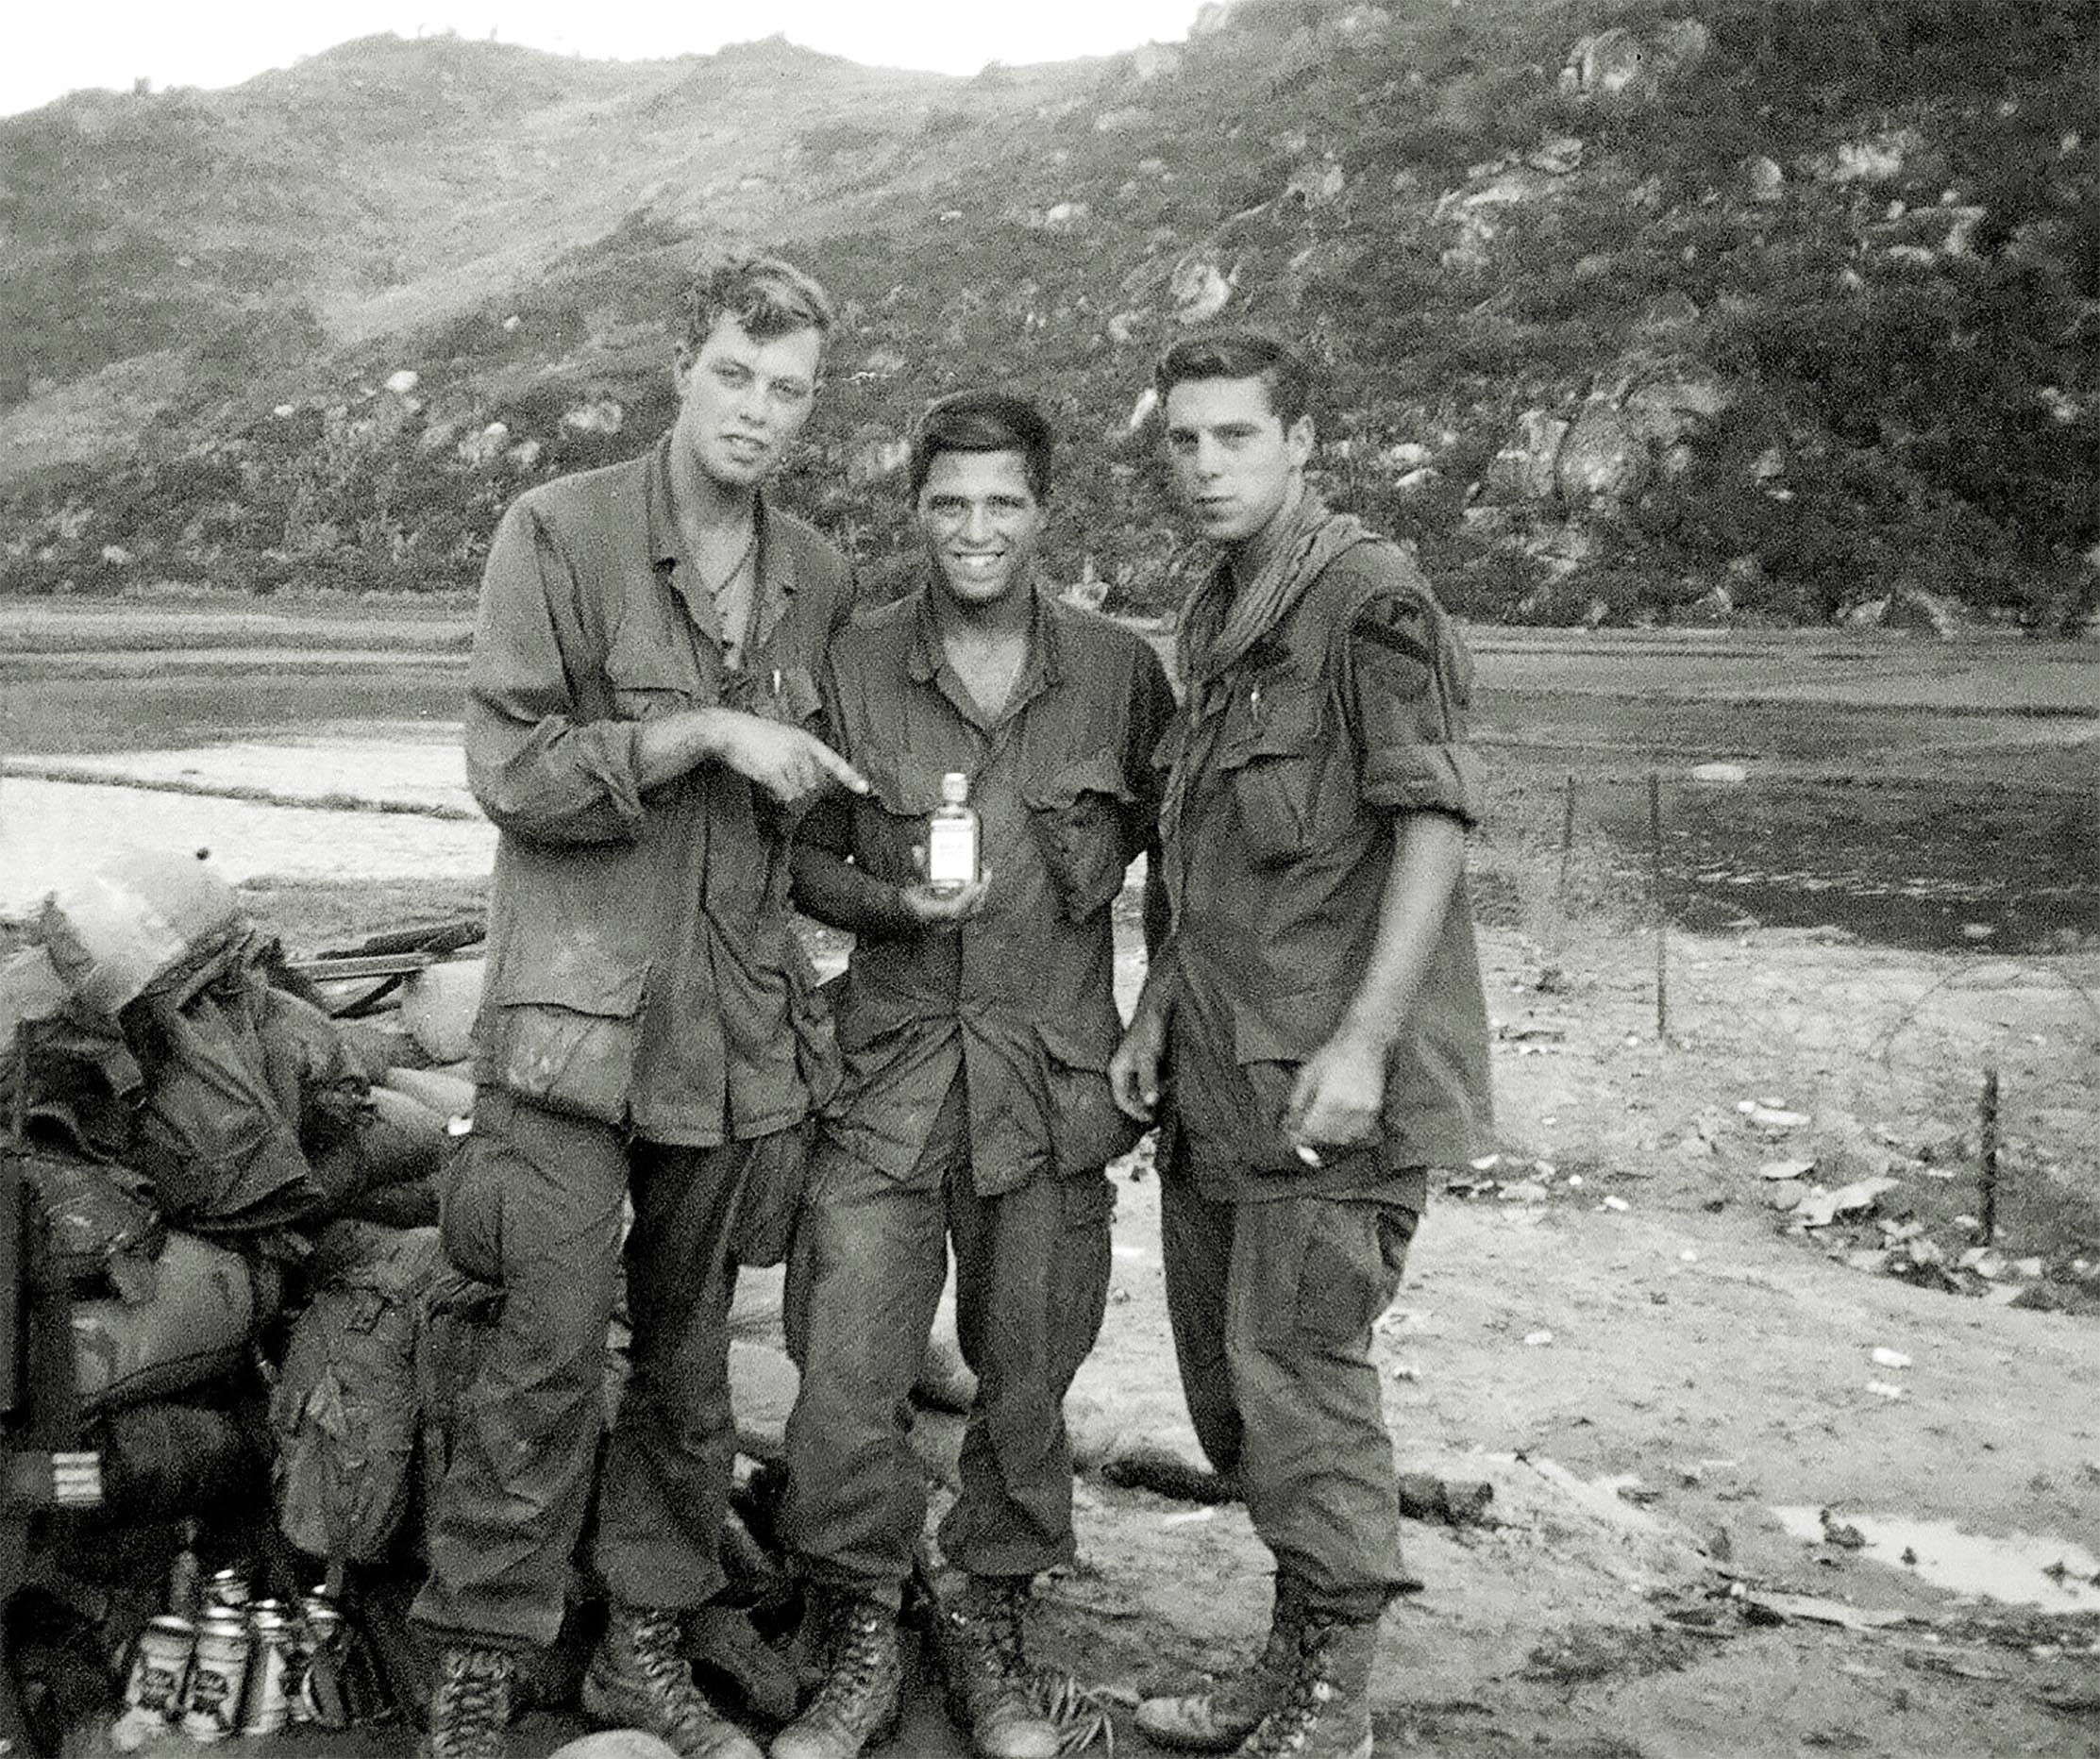 In his hunt for friends from the bar in Inwood, New York, Donohue found Rick Duggan, far left, of the 1st Cavalry Division (Airmobile), at Landing Zone Jane in northernmost South Vietnam. The men are holding a bottle of whiskey. Donohue’s Pabst Blue Ribbon is waiting in the lower left corner. / Courtesy John Donohue